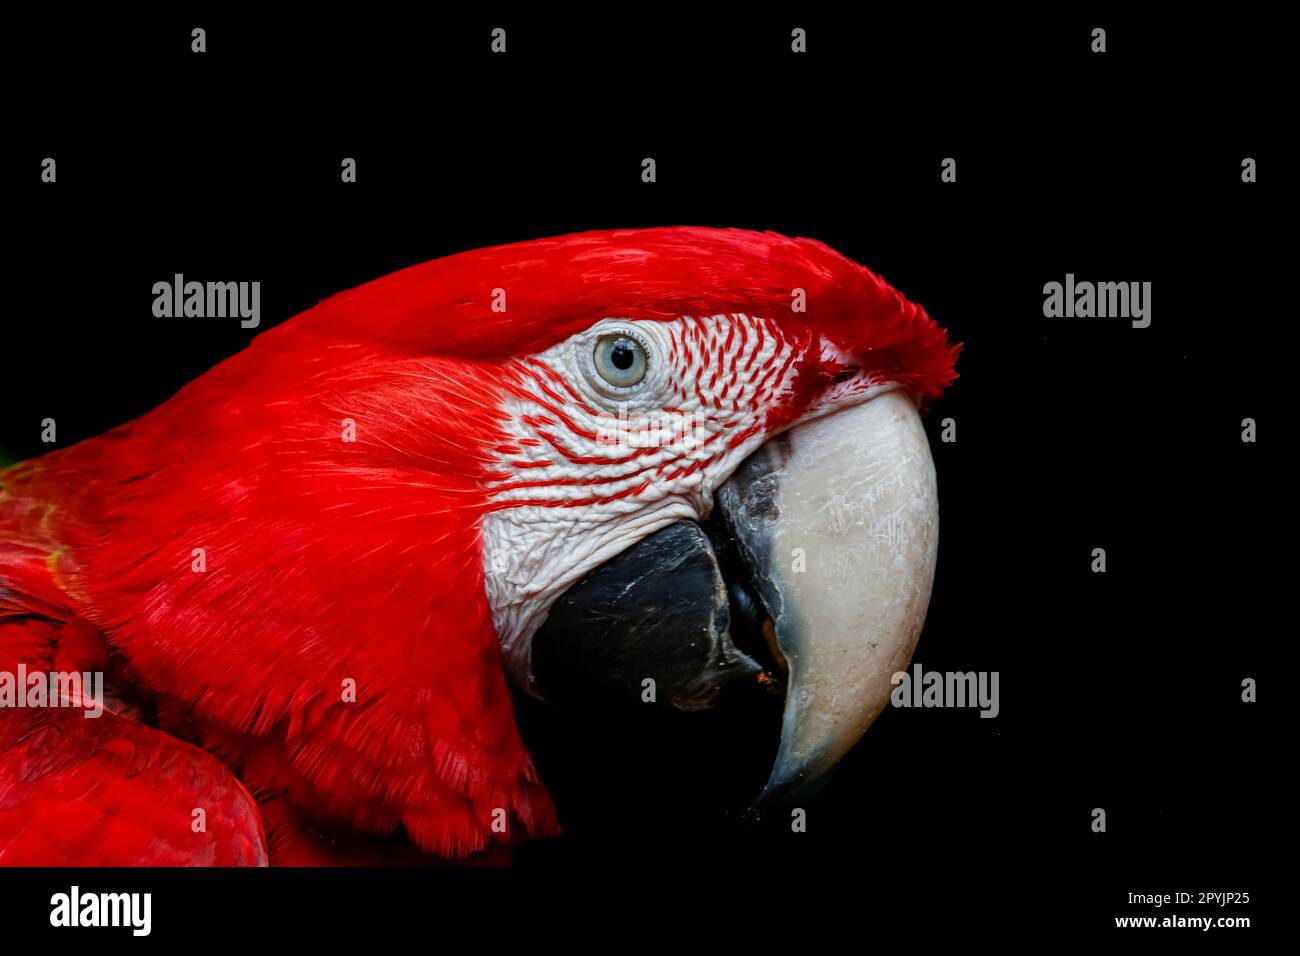 Detail of plumage with layers of colorful feathers in light, dark background Stock Photo